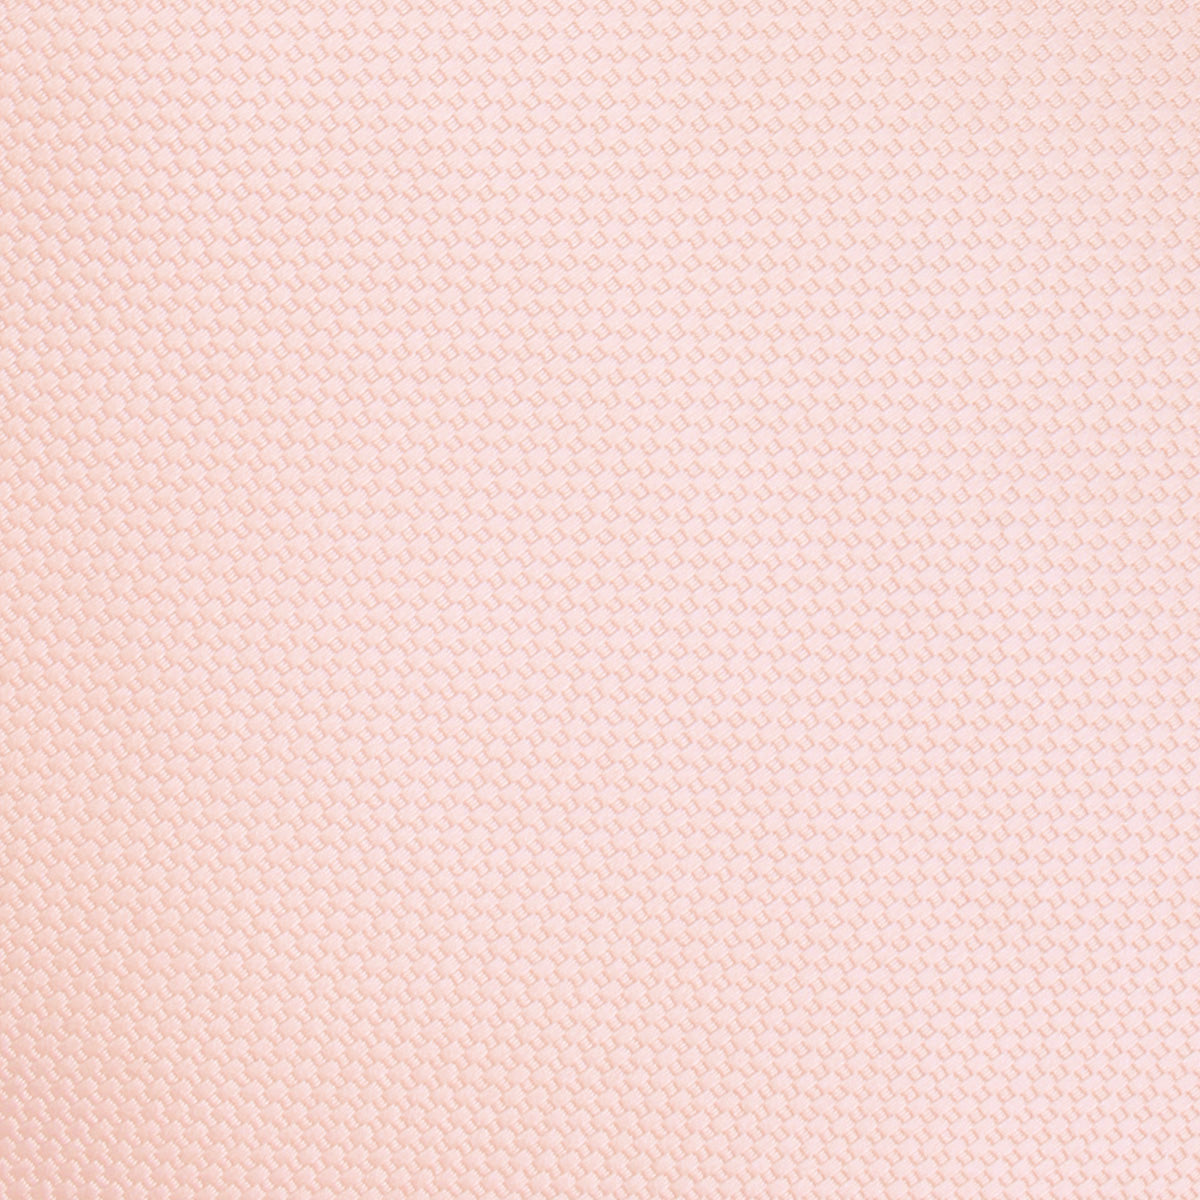 Blush Pink Basket Weave Bow Tie Fabric